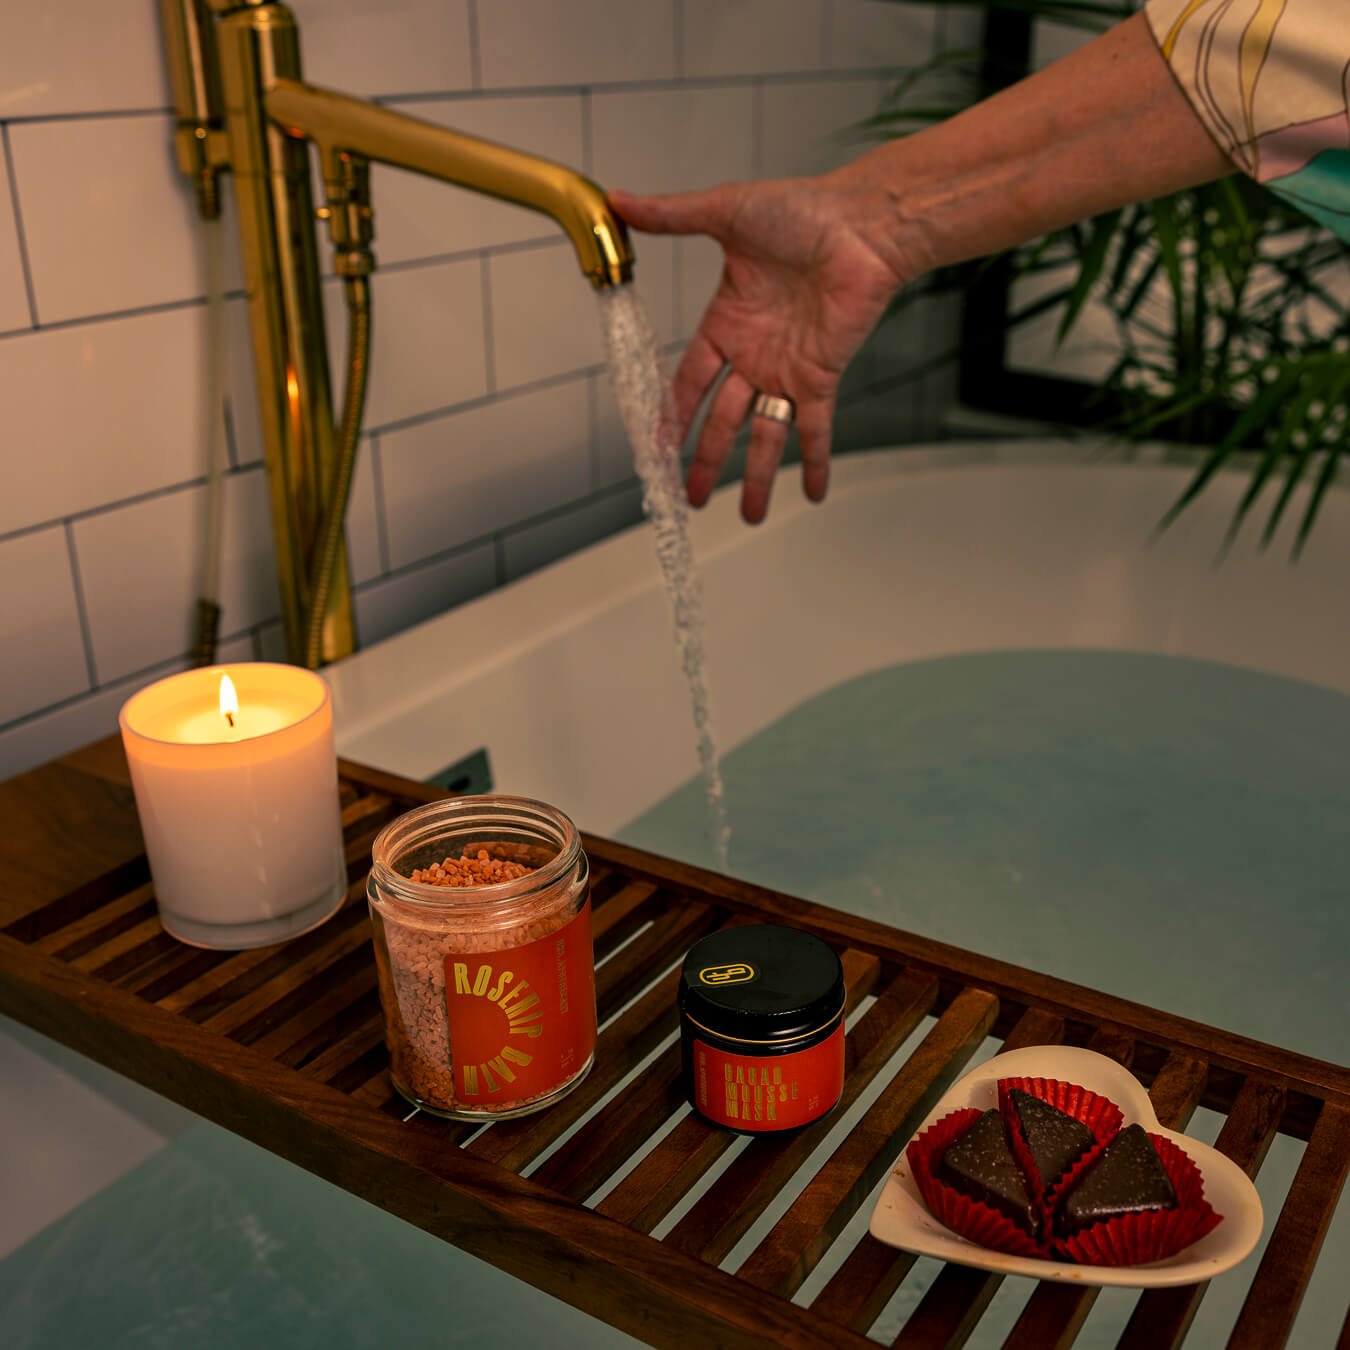 A serene setting in a bathroom with a candle, bath salts, a jar of cacao mousse mask, and three chocolate truffles over a large bath tub that is filling with water